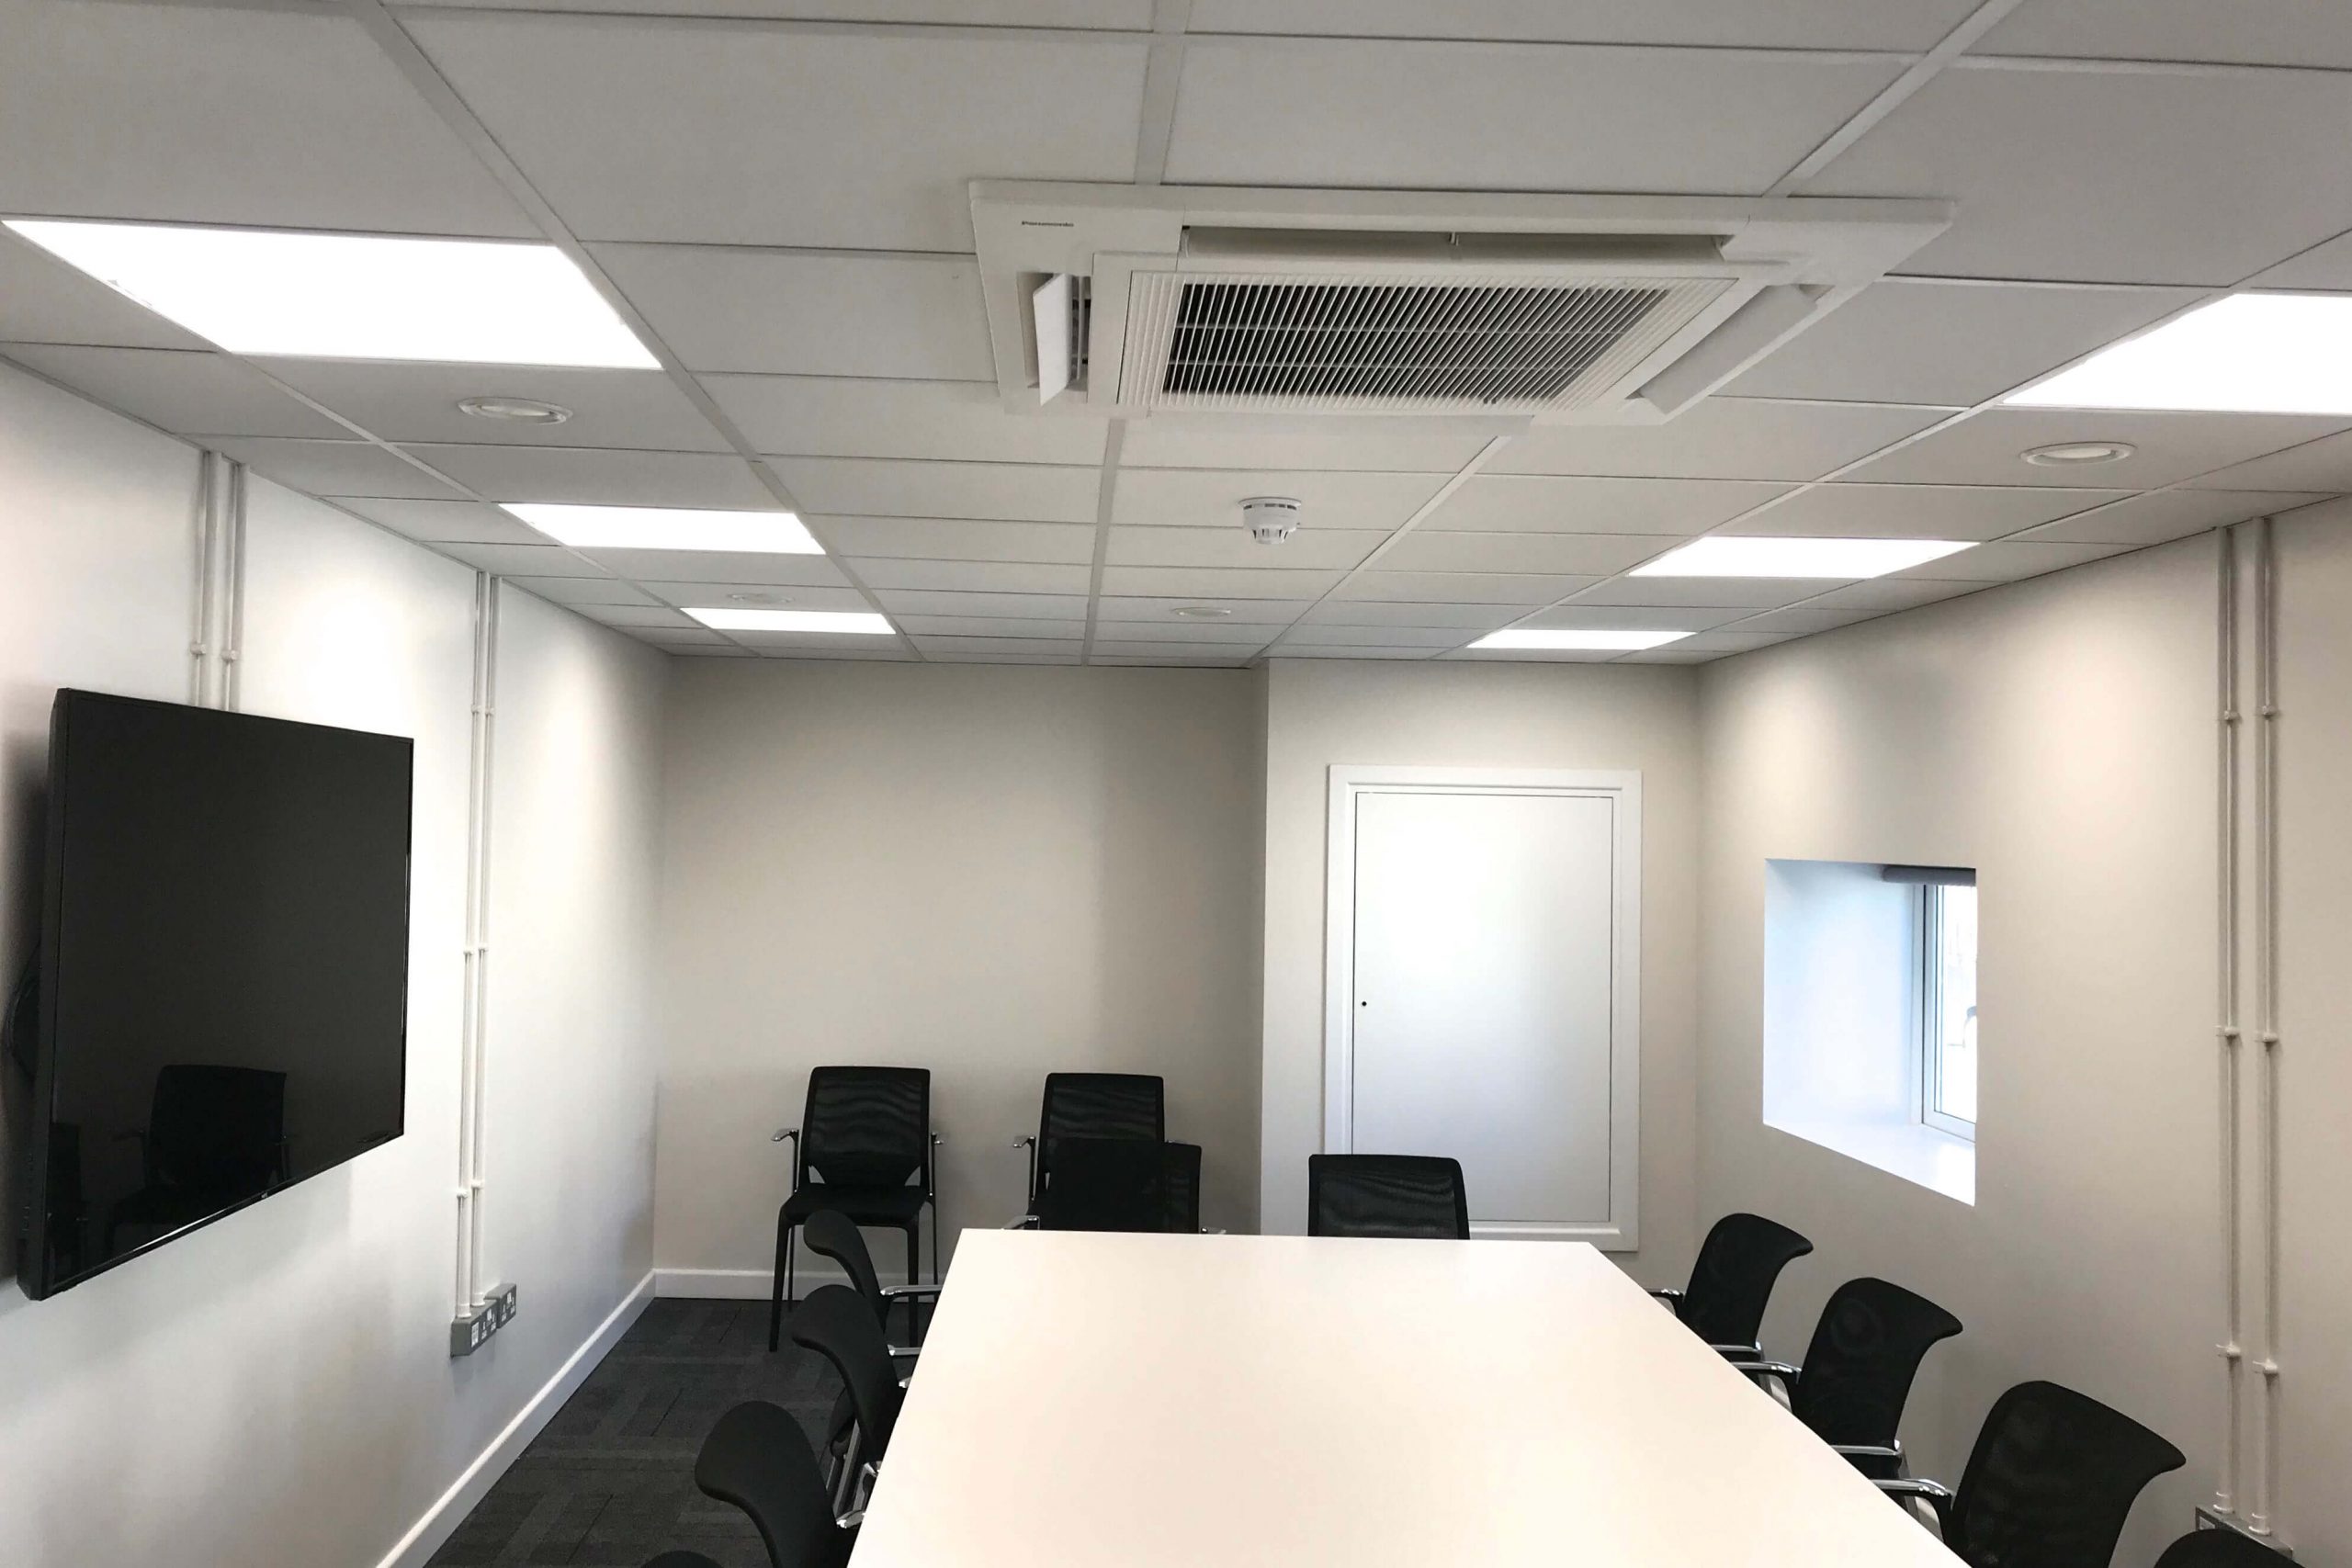 Norwood junction large commercial air conditioning solution by SubCool FM white cassette ceiling unit in meeting room